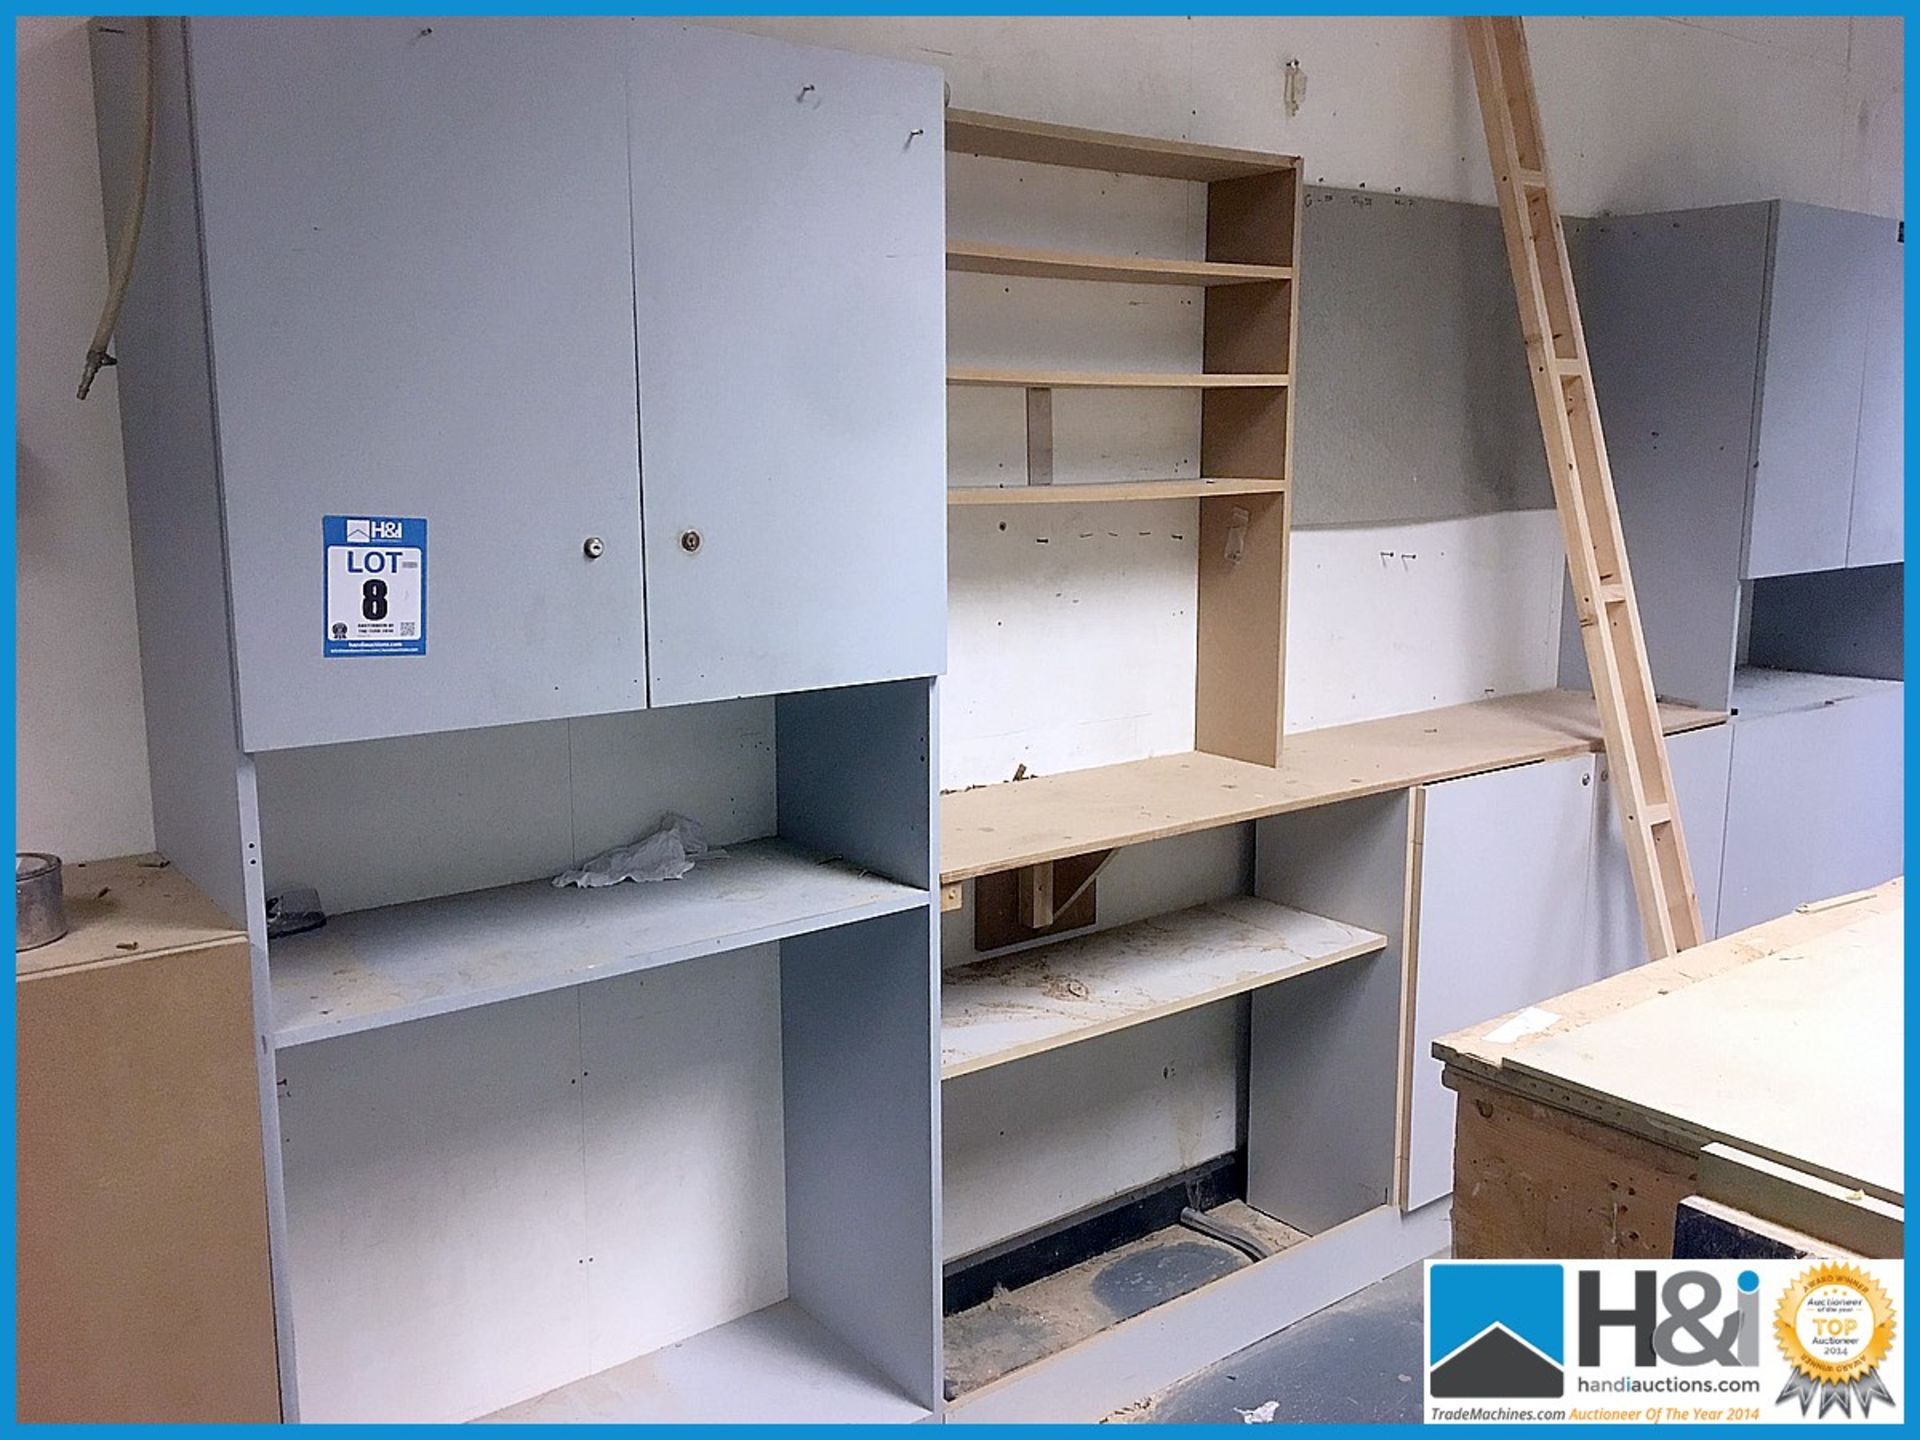 Various storage cupboards to walls. Buyer to remove. Take as much or as little as you wish